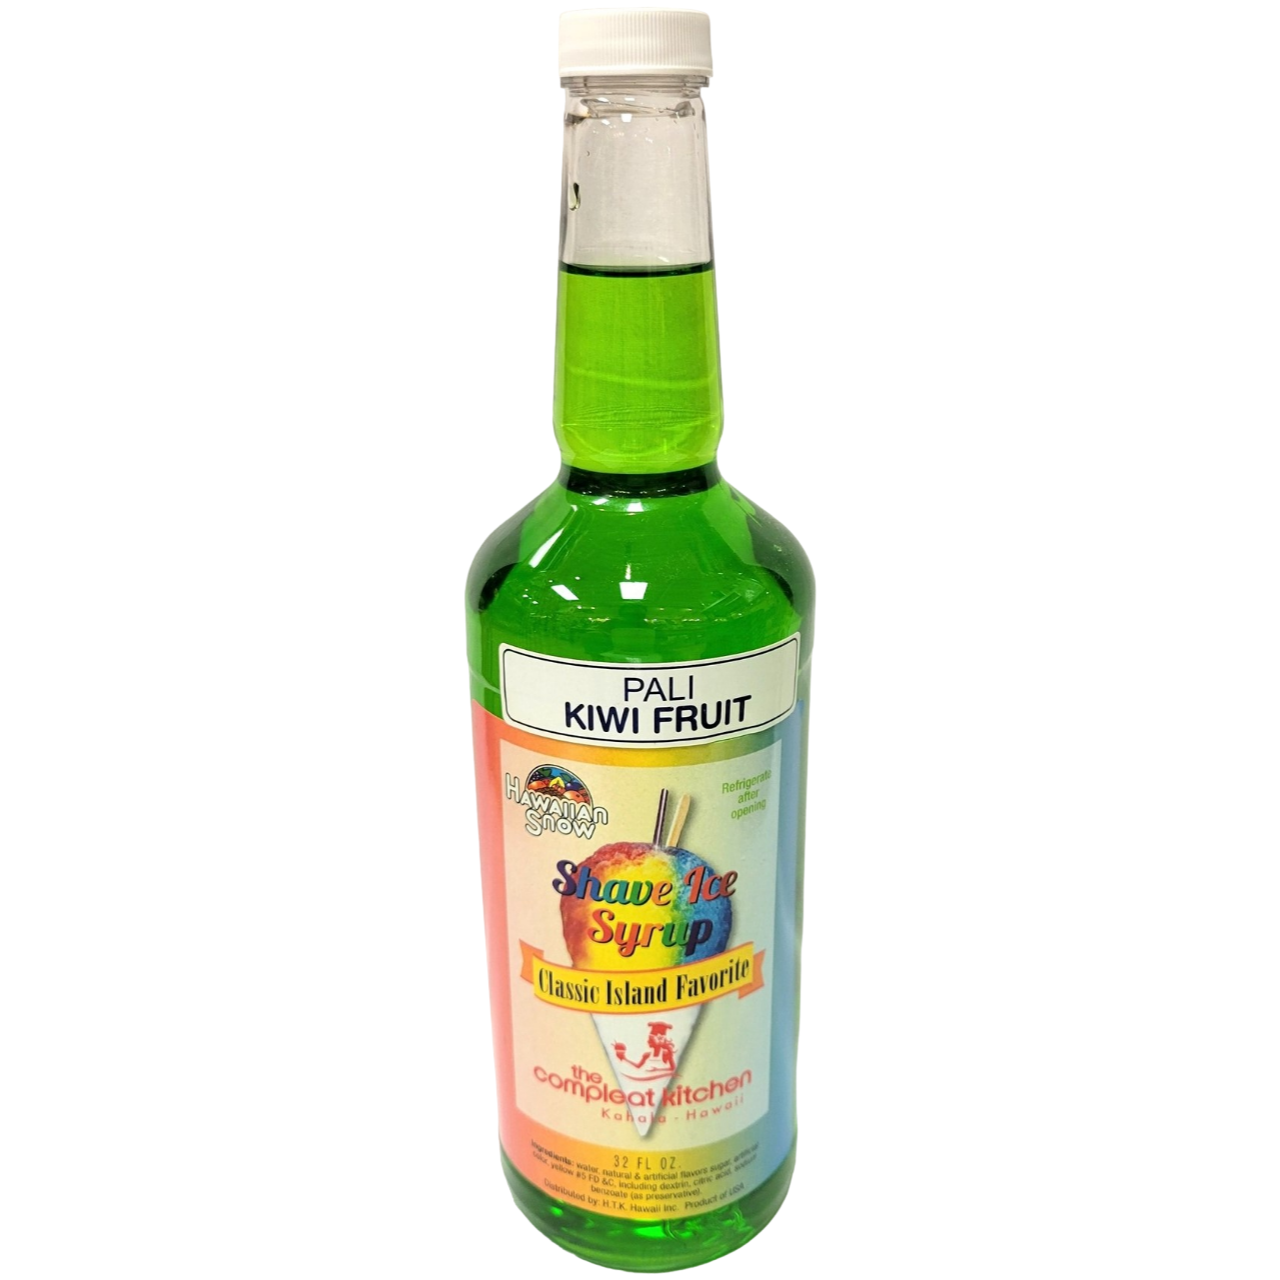 The Compleat Kitchen Shave Ice Syrup - Pali Kiwi